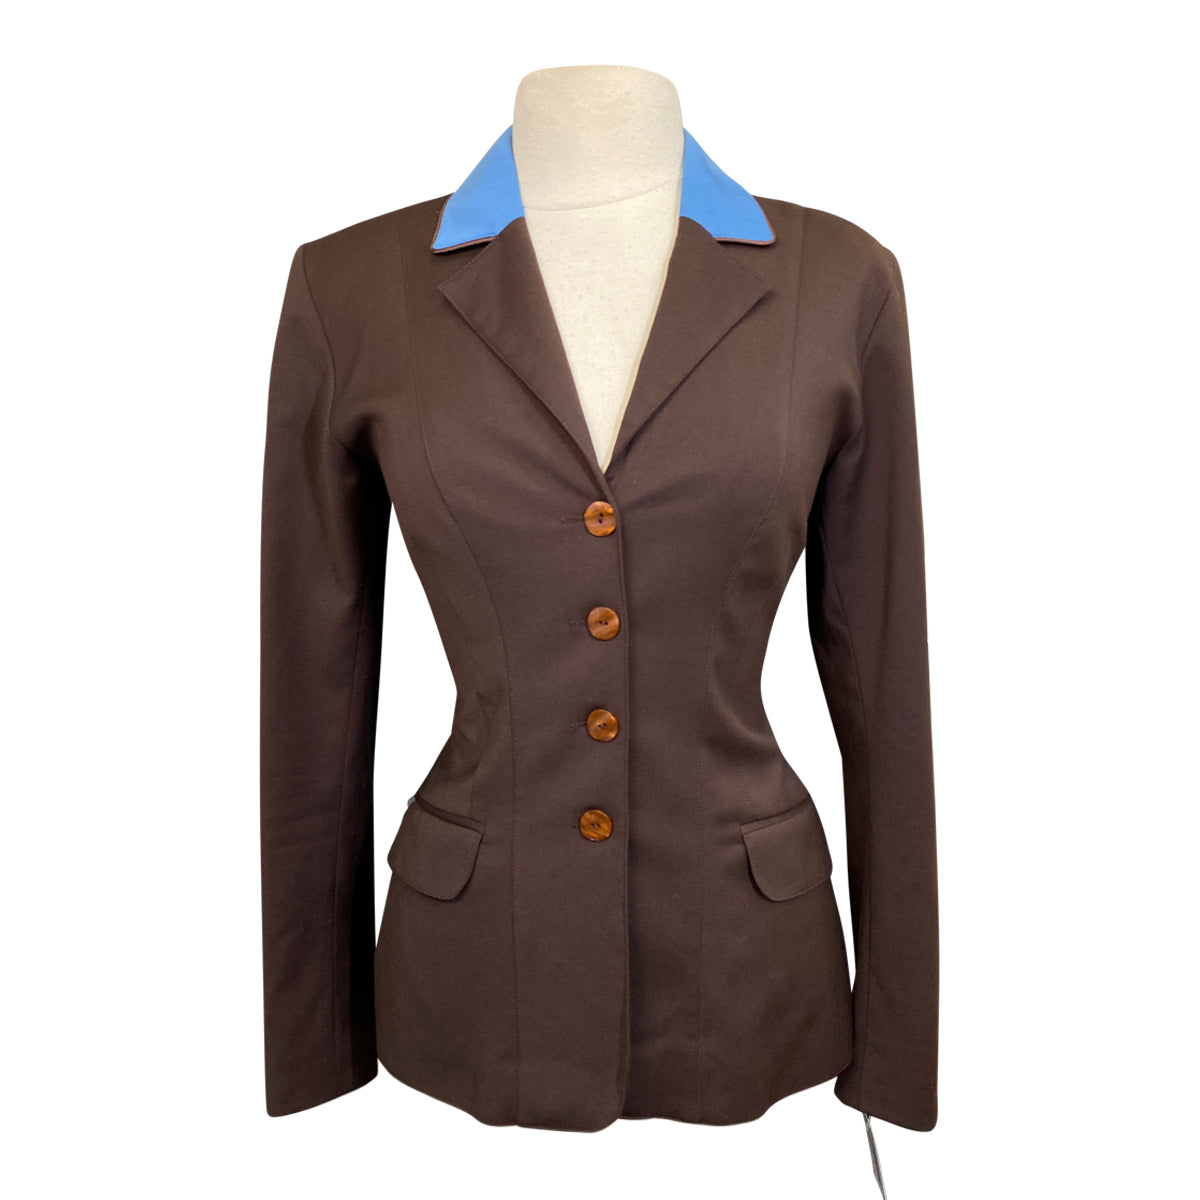 Winston Equestrian Classic Competition Coat in Chocolate Brown w/Blue